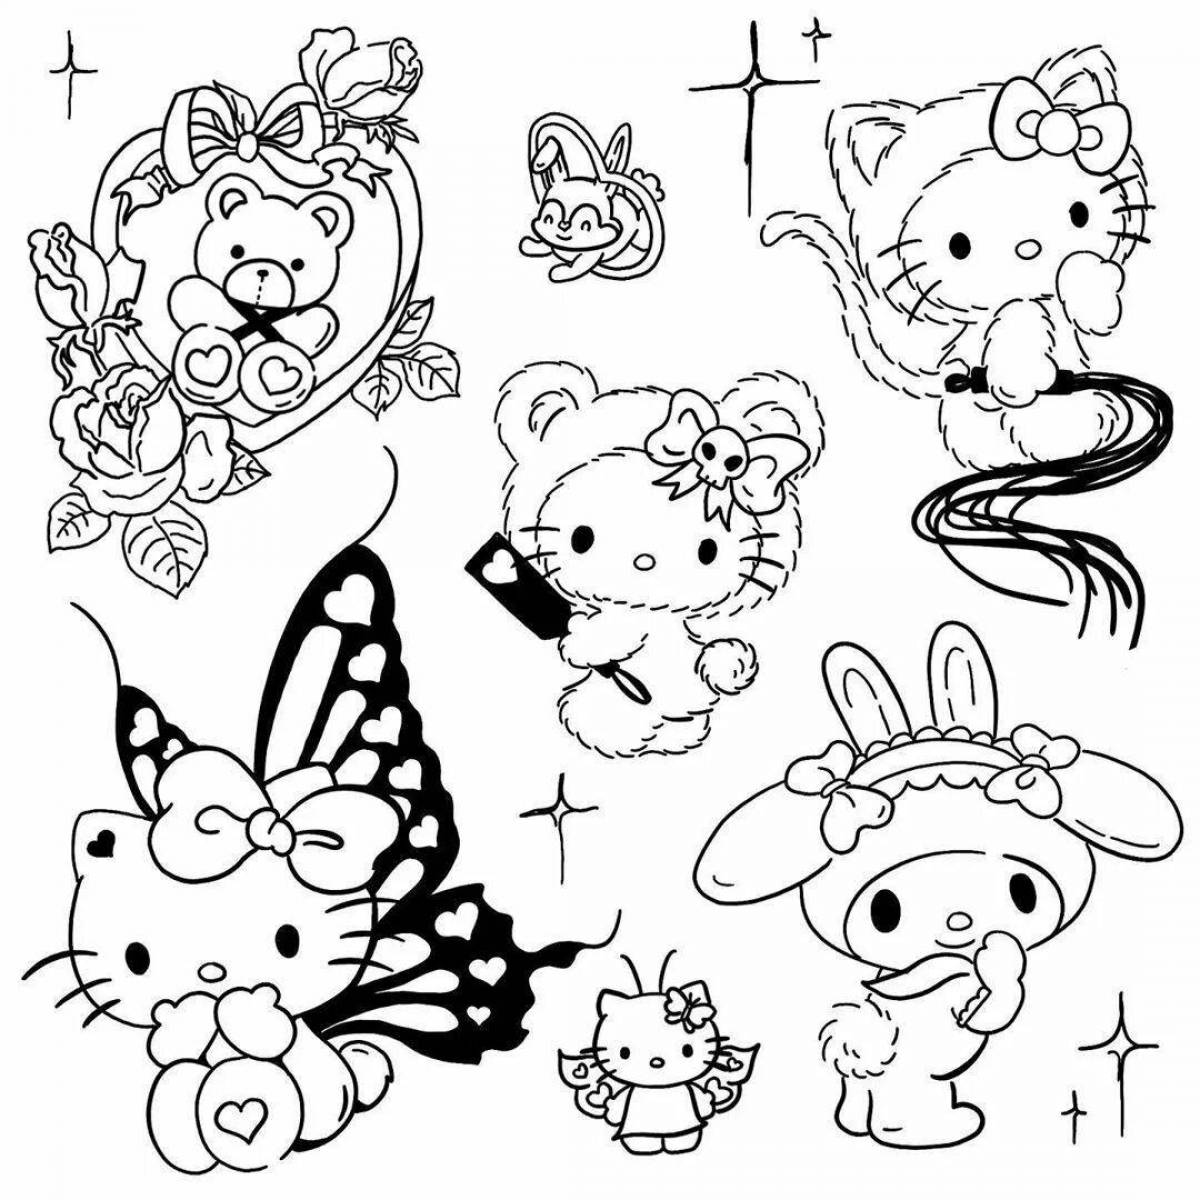 Live kuromi many coloring pages